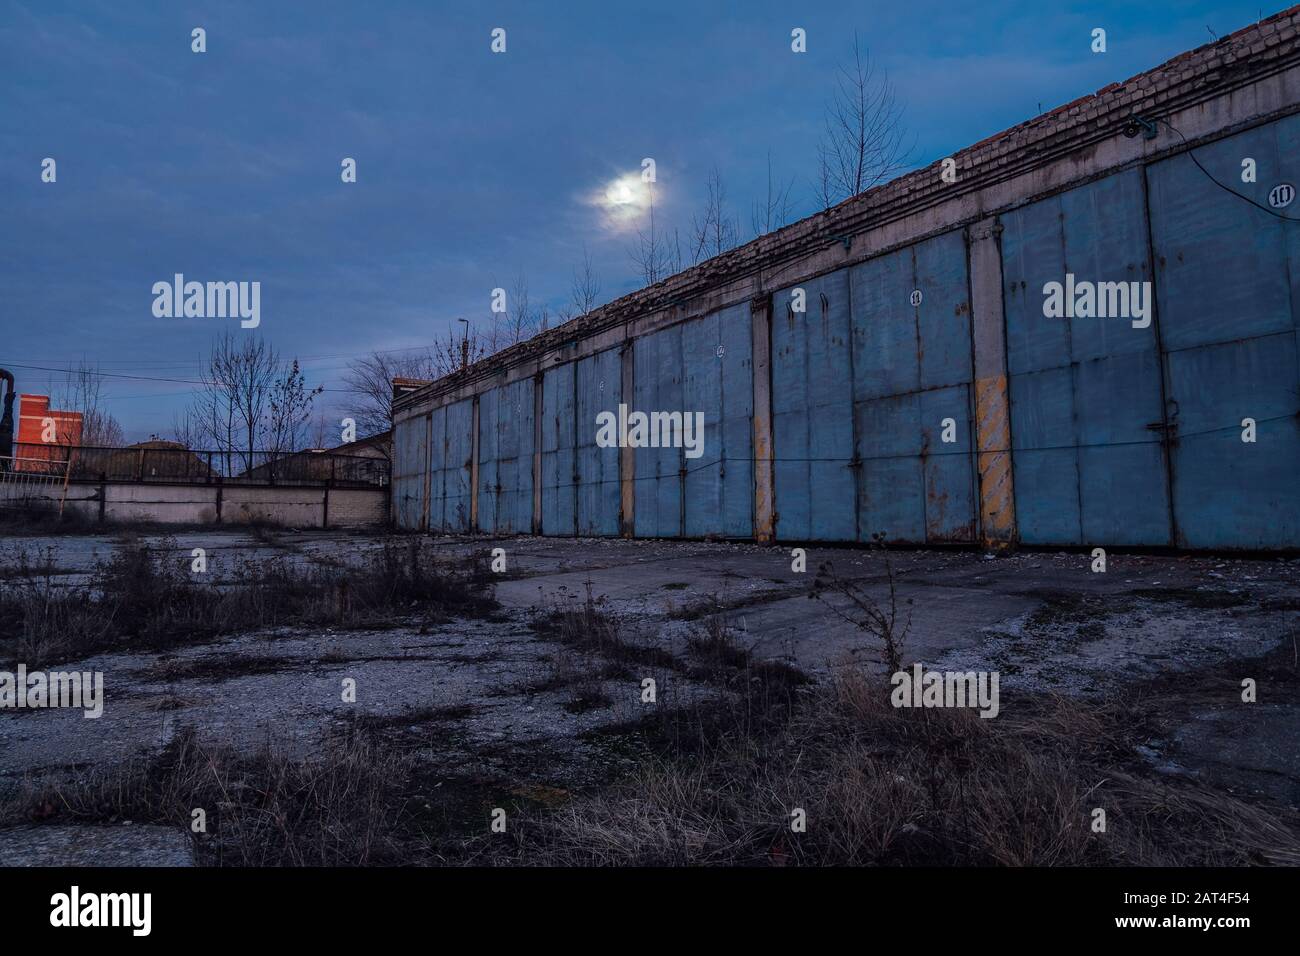 Old abandoned truck or tractor garages at night Stock Photo